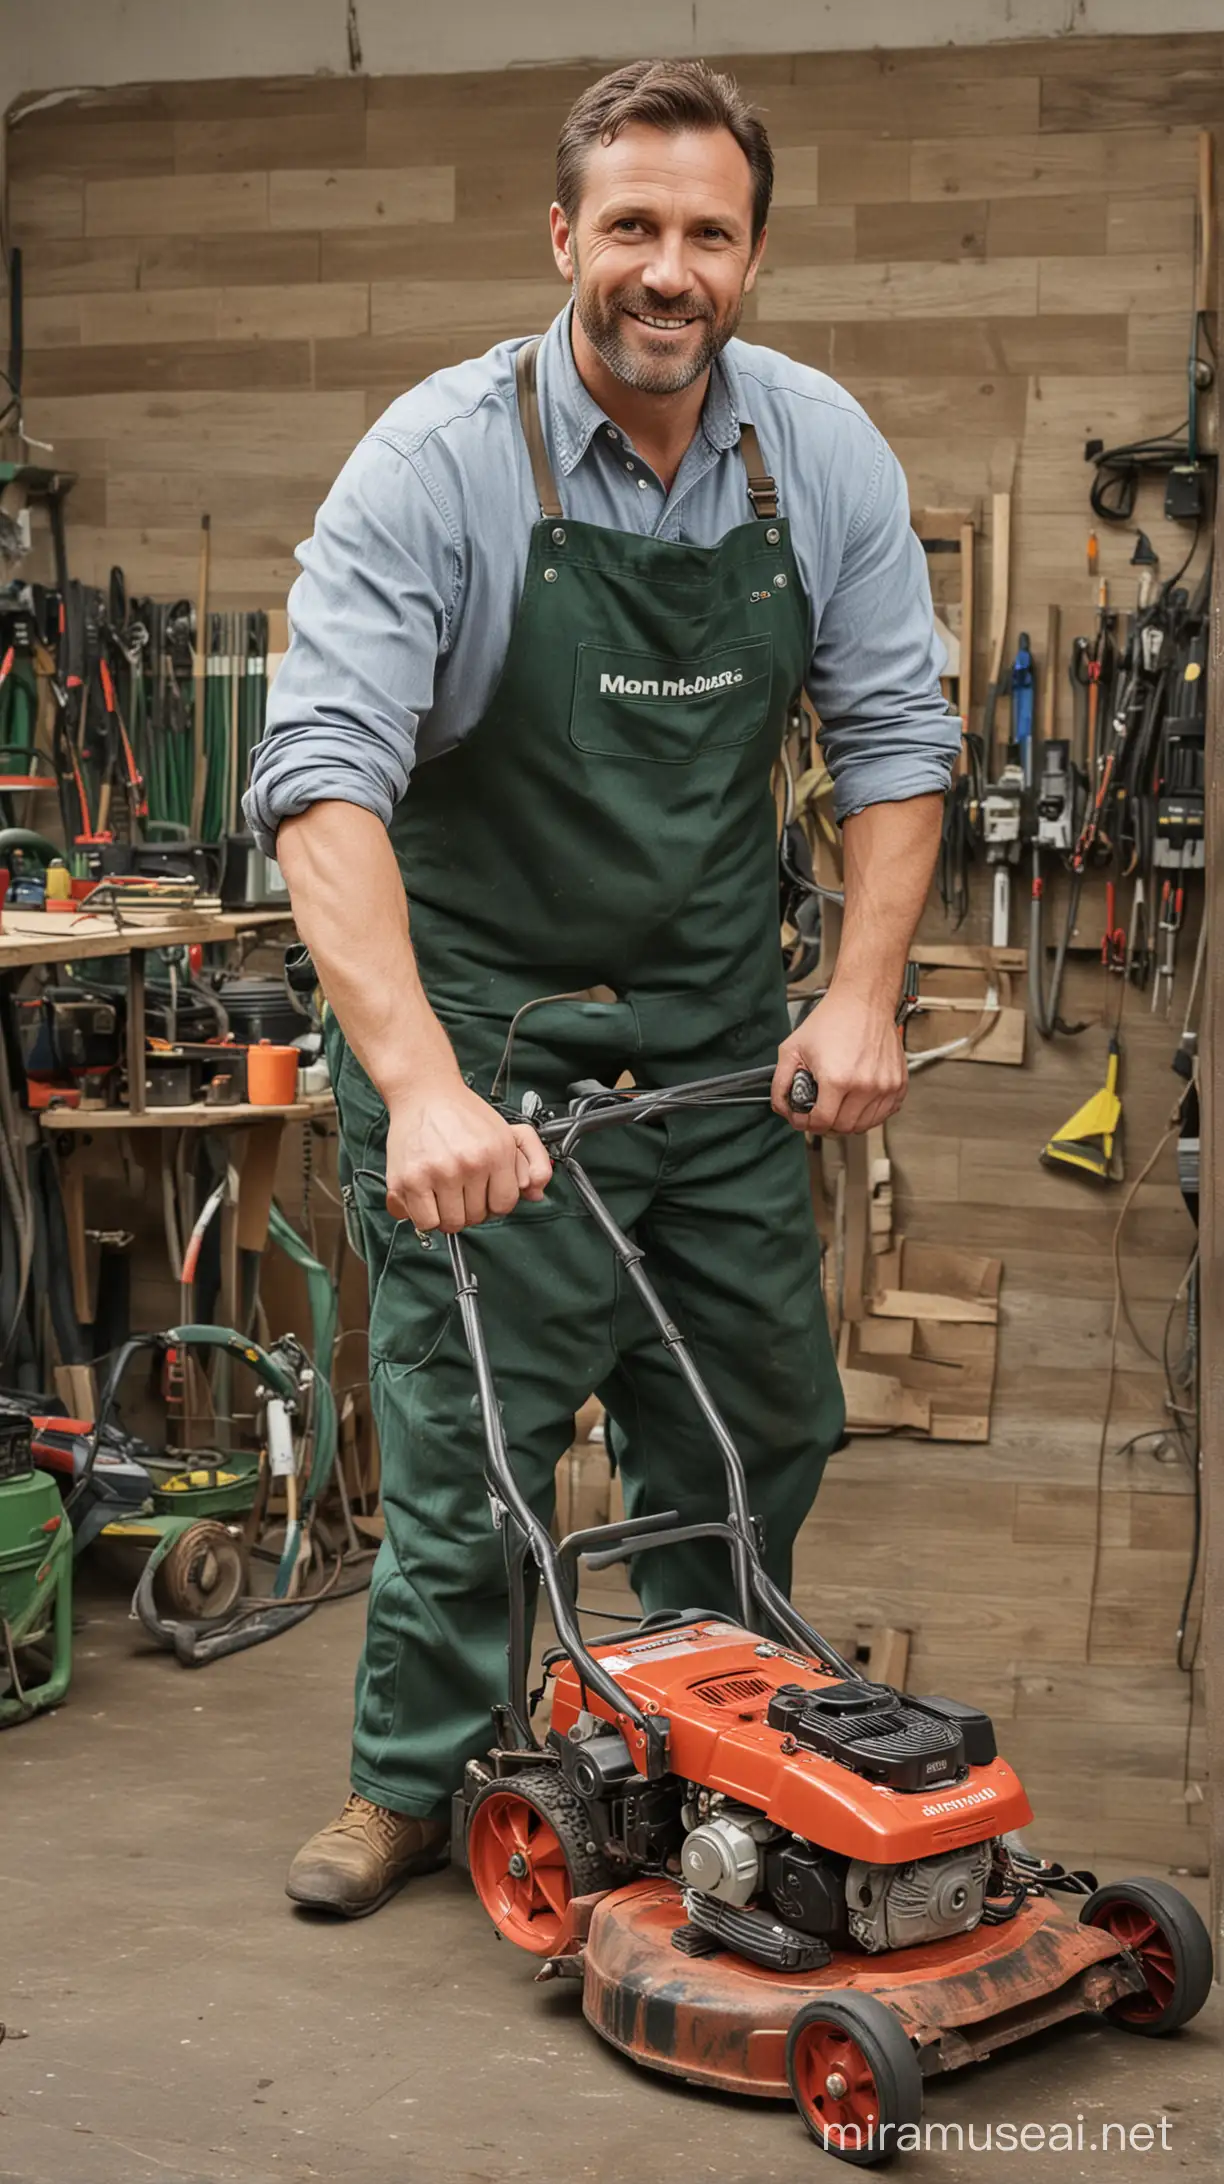 Create a 40-year old man, in a workshop where he sells lawn mowers.